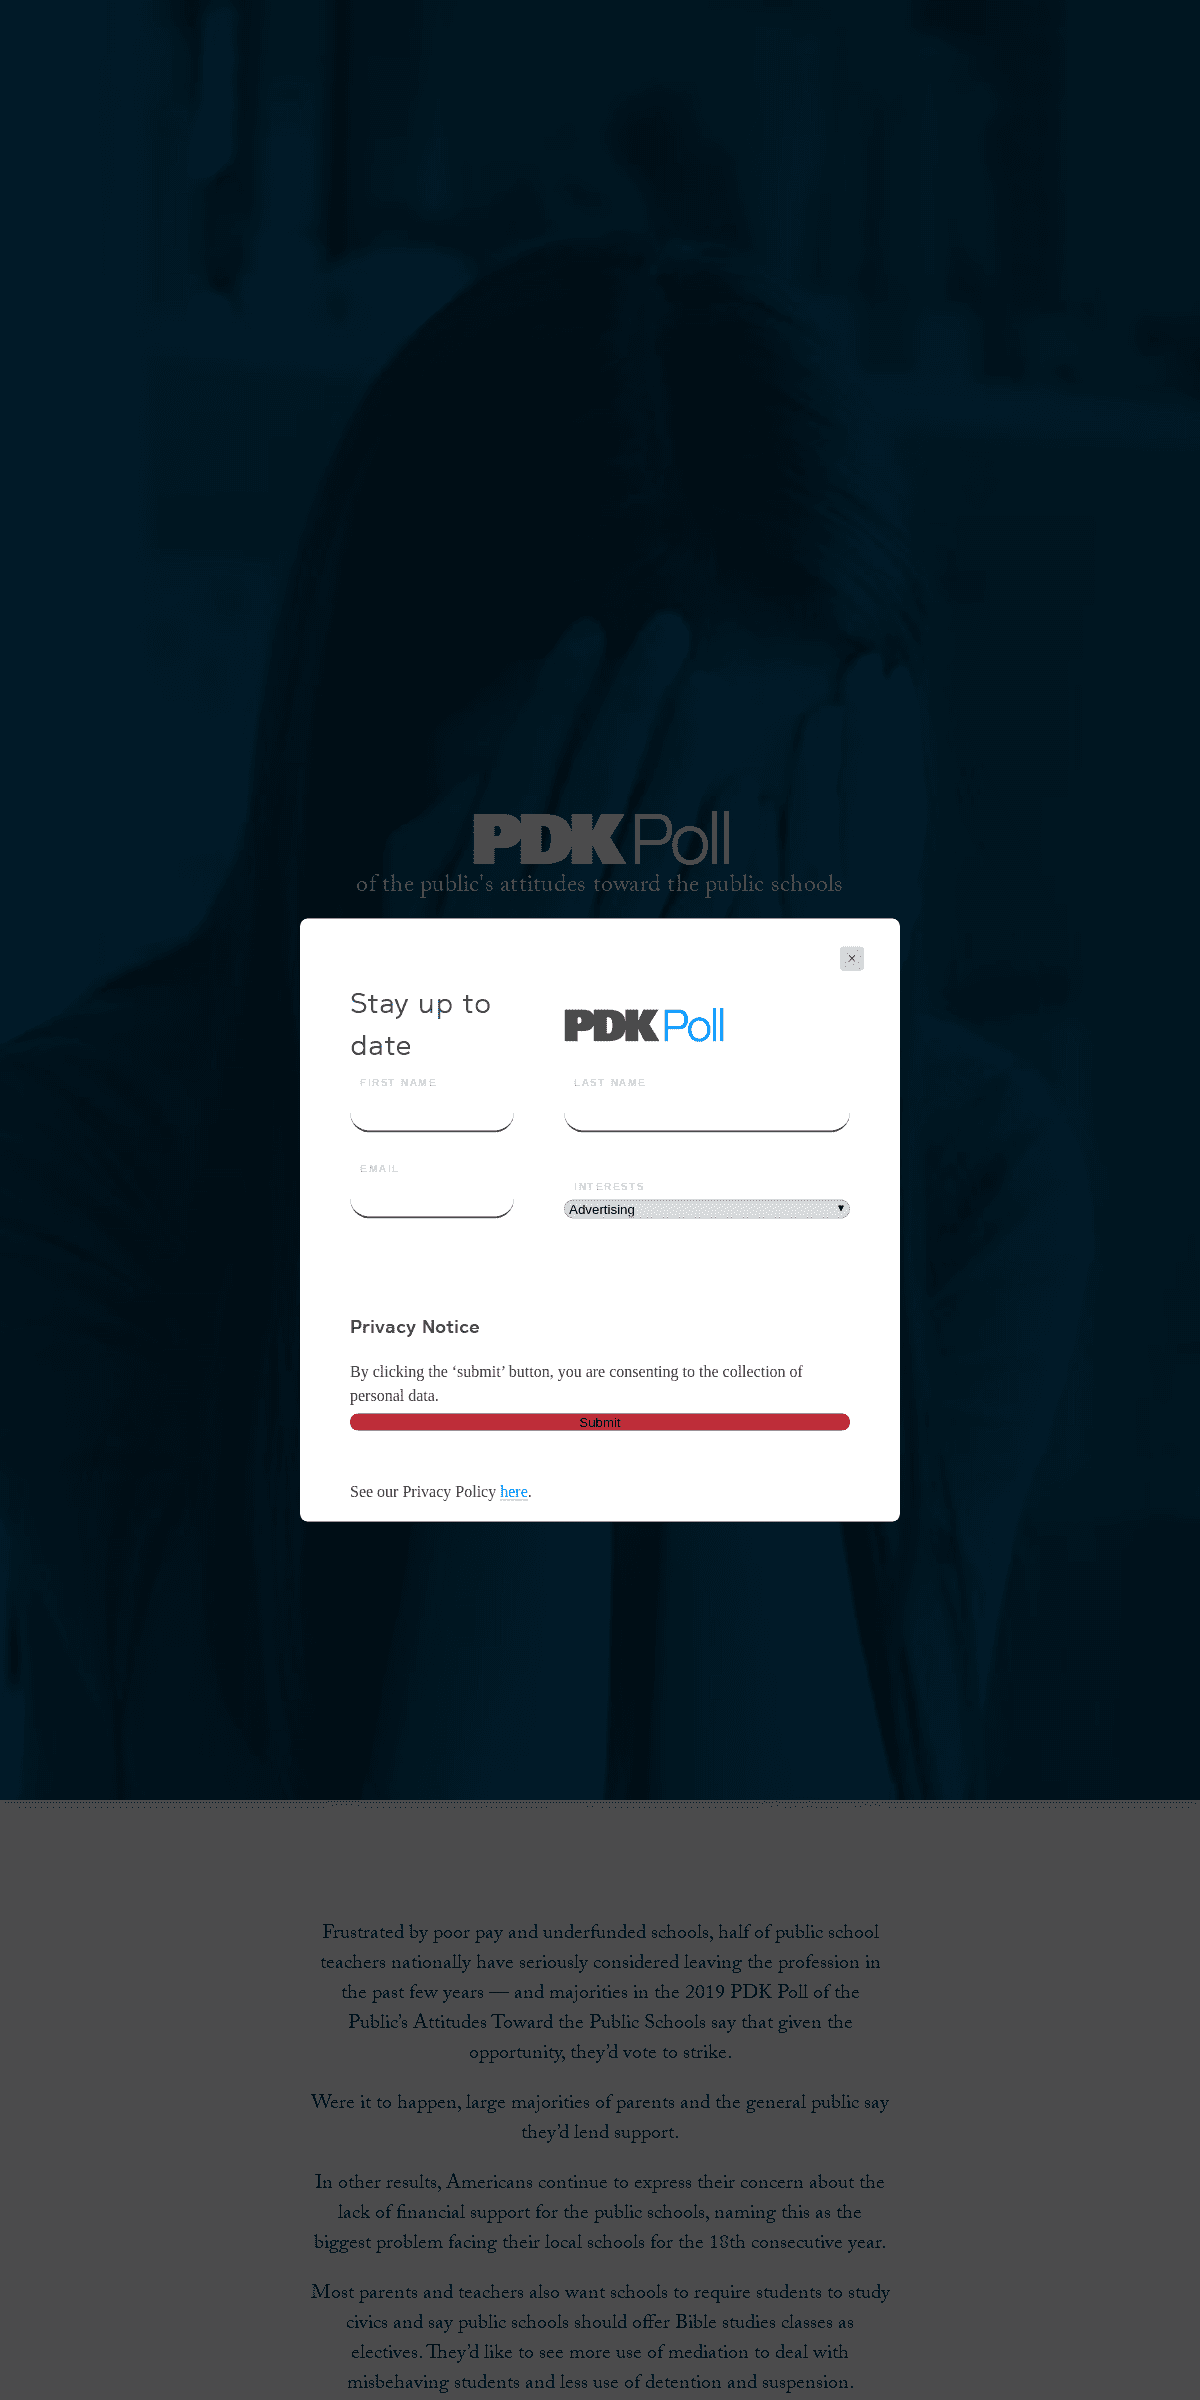 A complete backup of pdkpoll.org